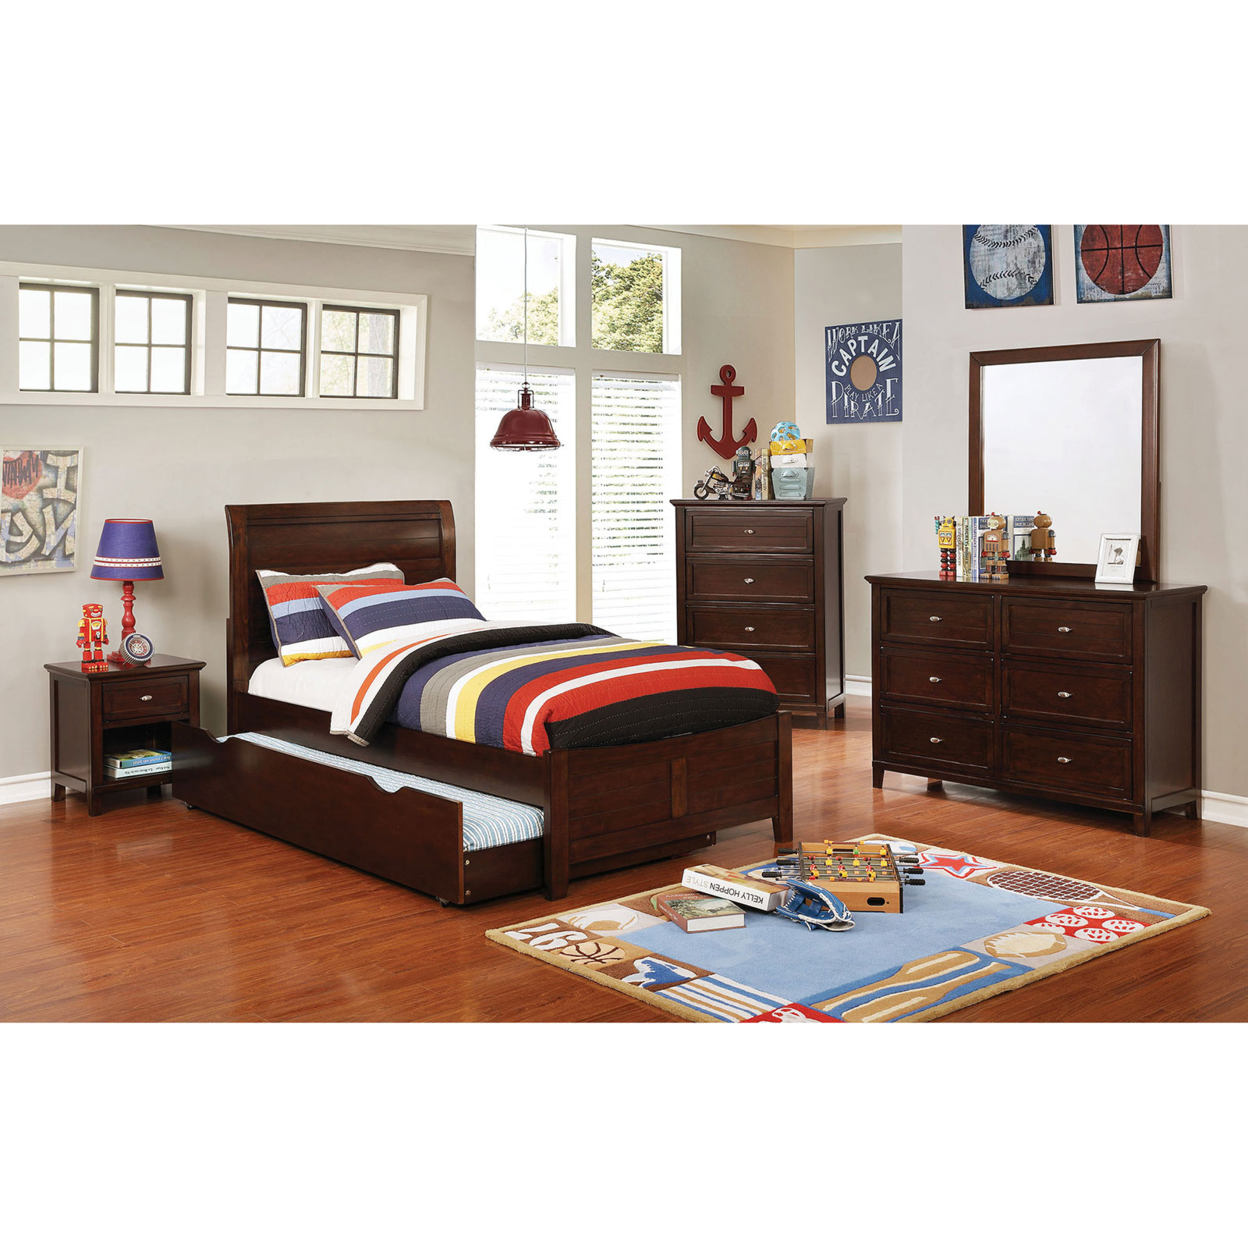 Transitional Full Size Bed With Sleigh Plank Panel Headboard, Brown- Saltoro Sherpi